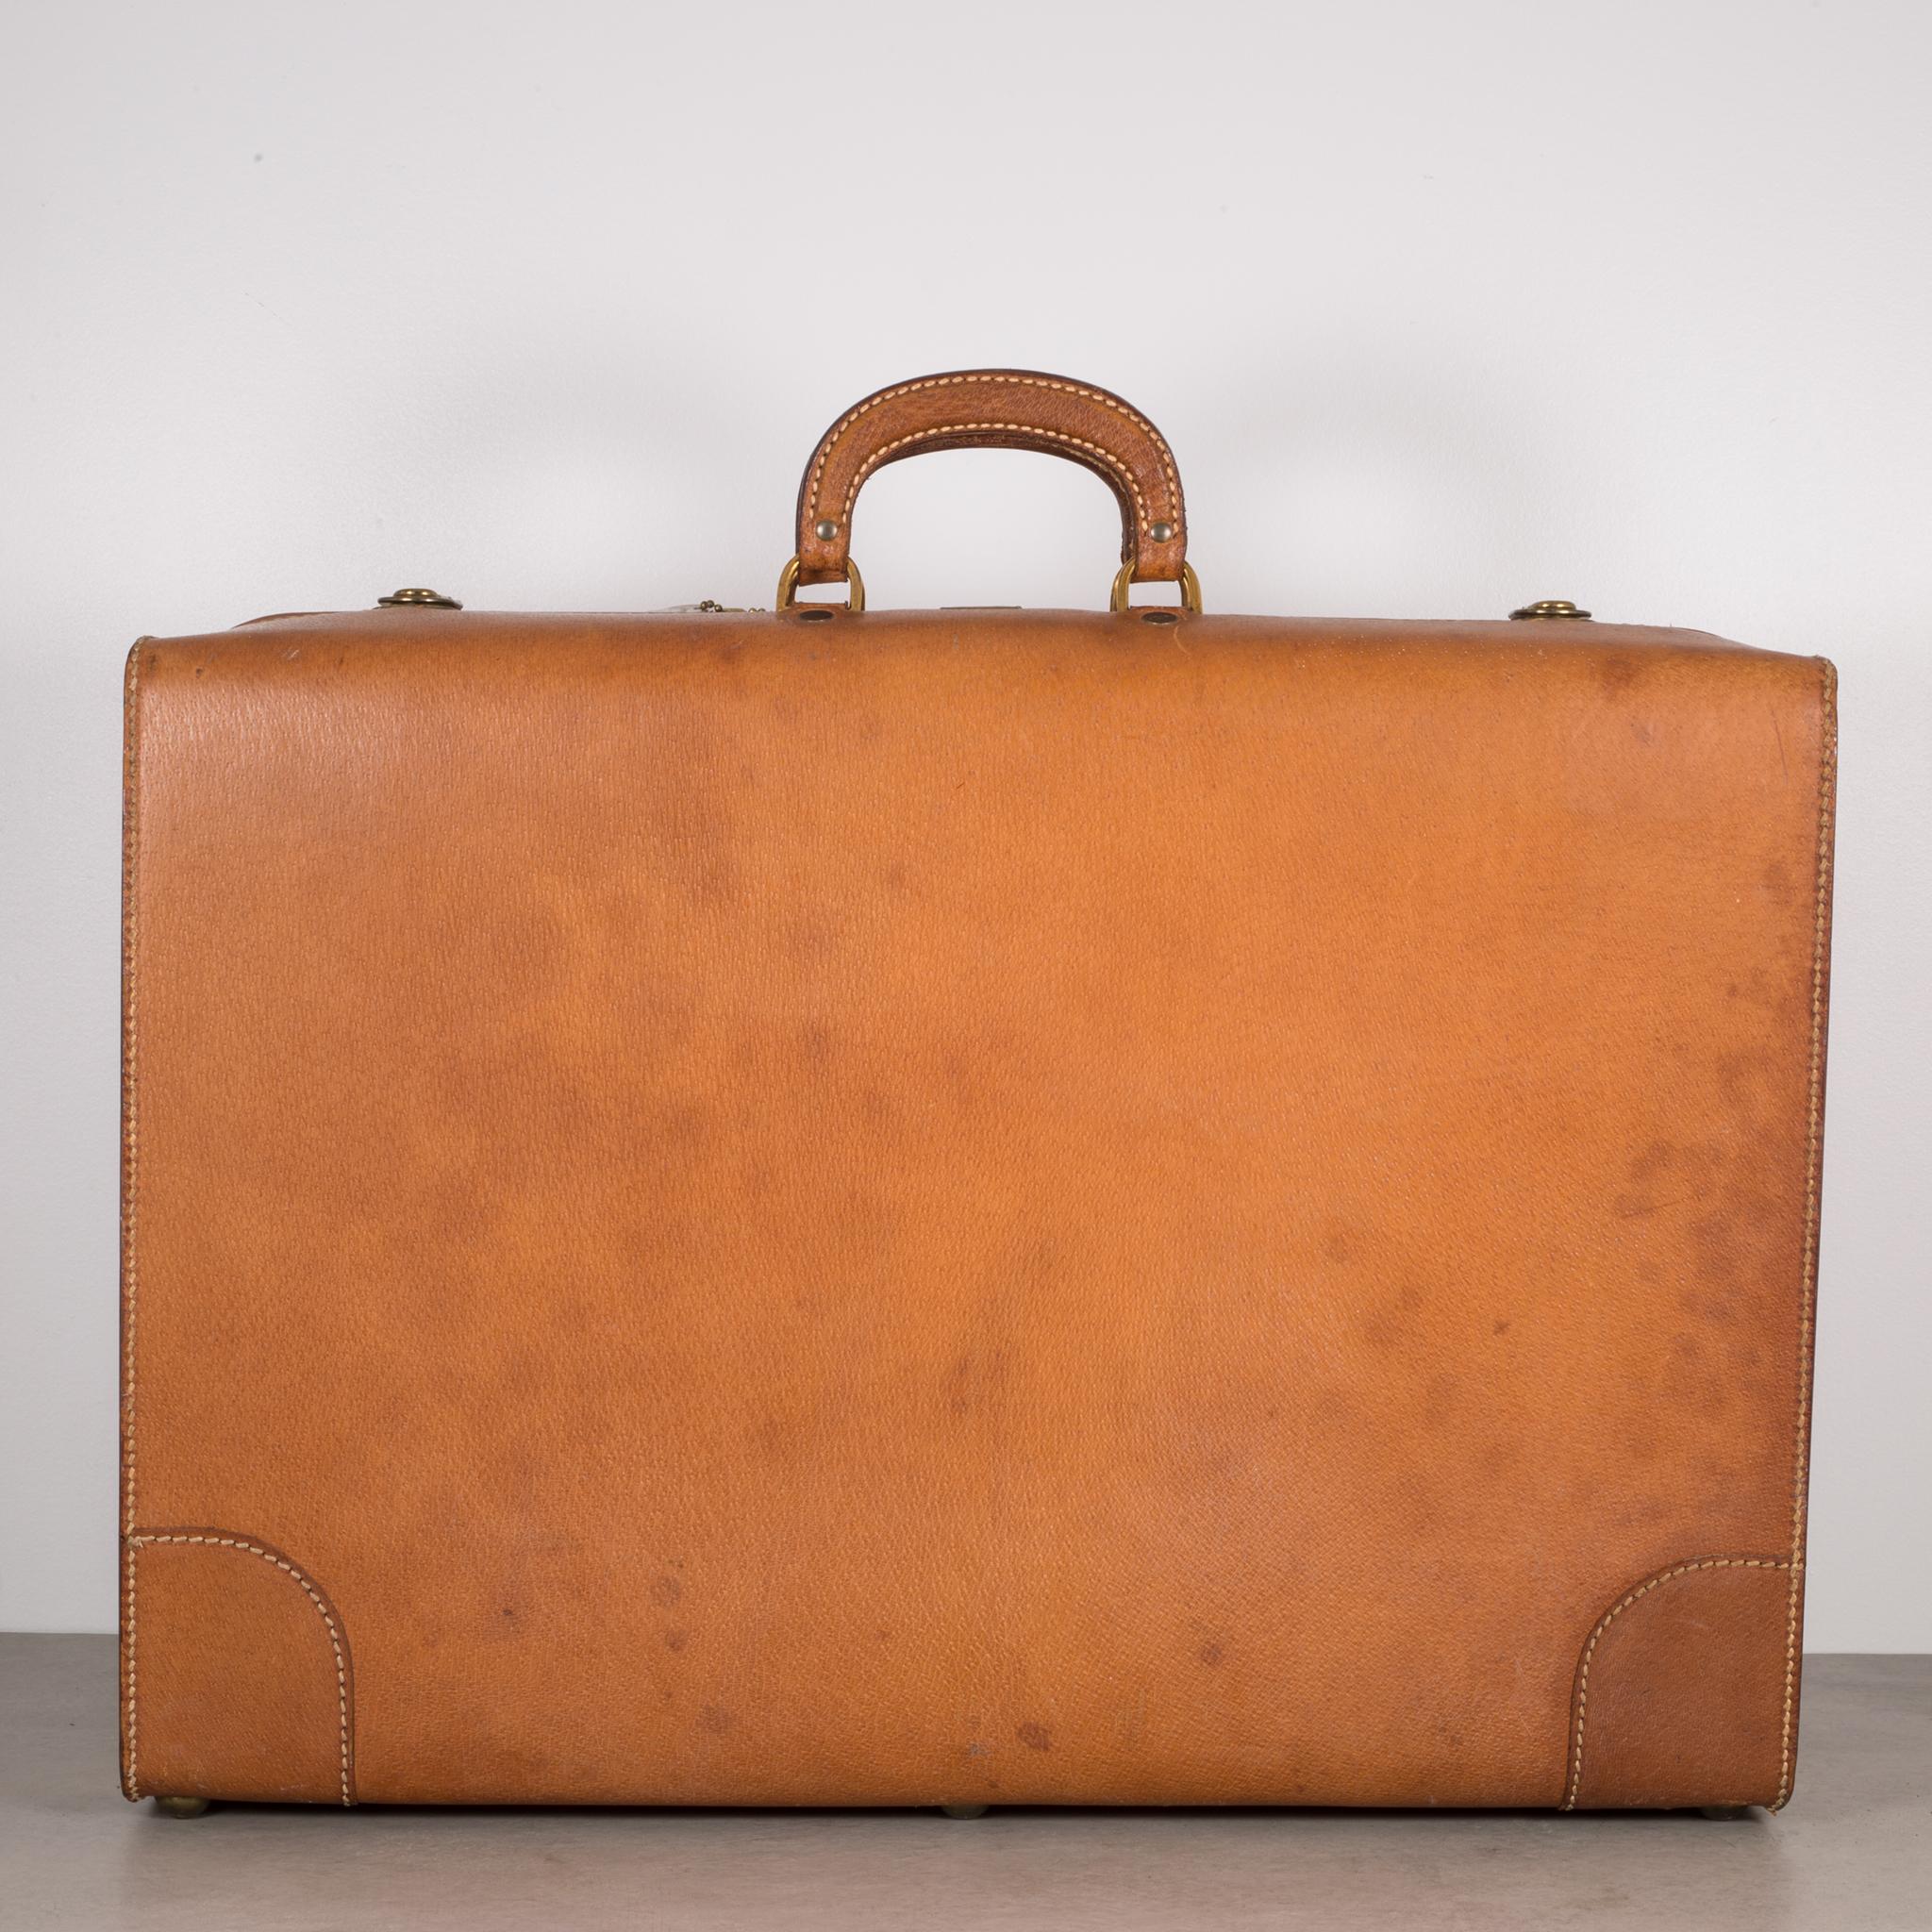 About

This is an original 100% pigskin luggage by Boyle. The suitcase has large round, brass feet and brass locks with the original key. It is beautifully swen with whip stitching throughout and reinforced pigskin corners. The interior is